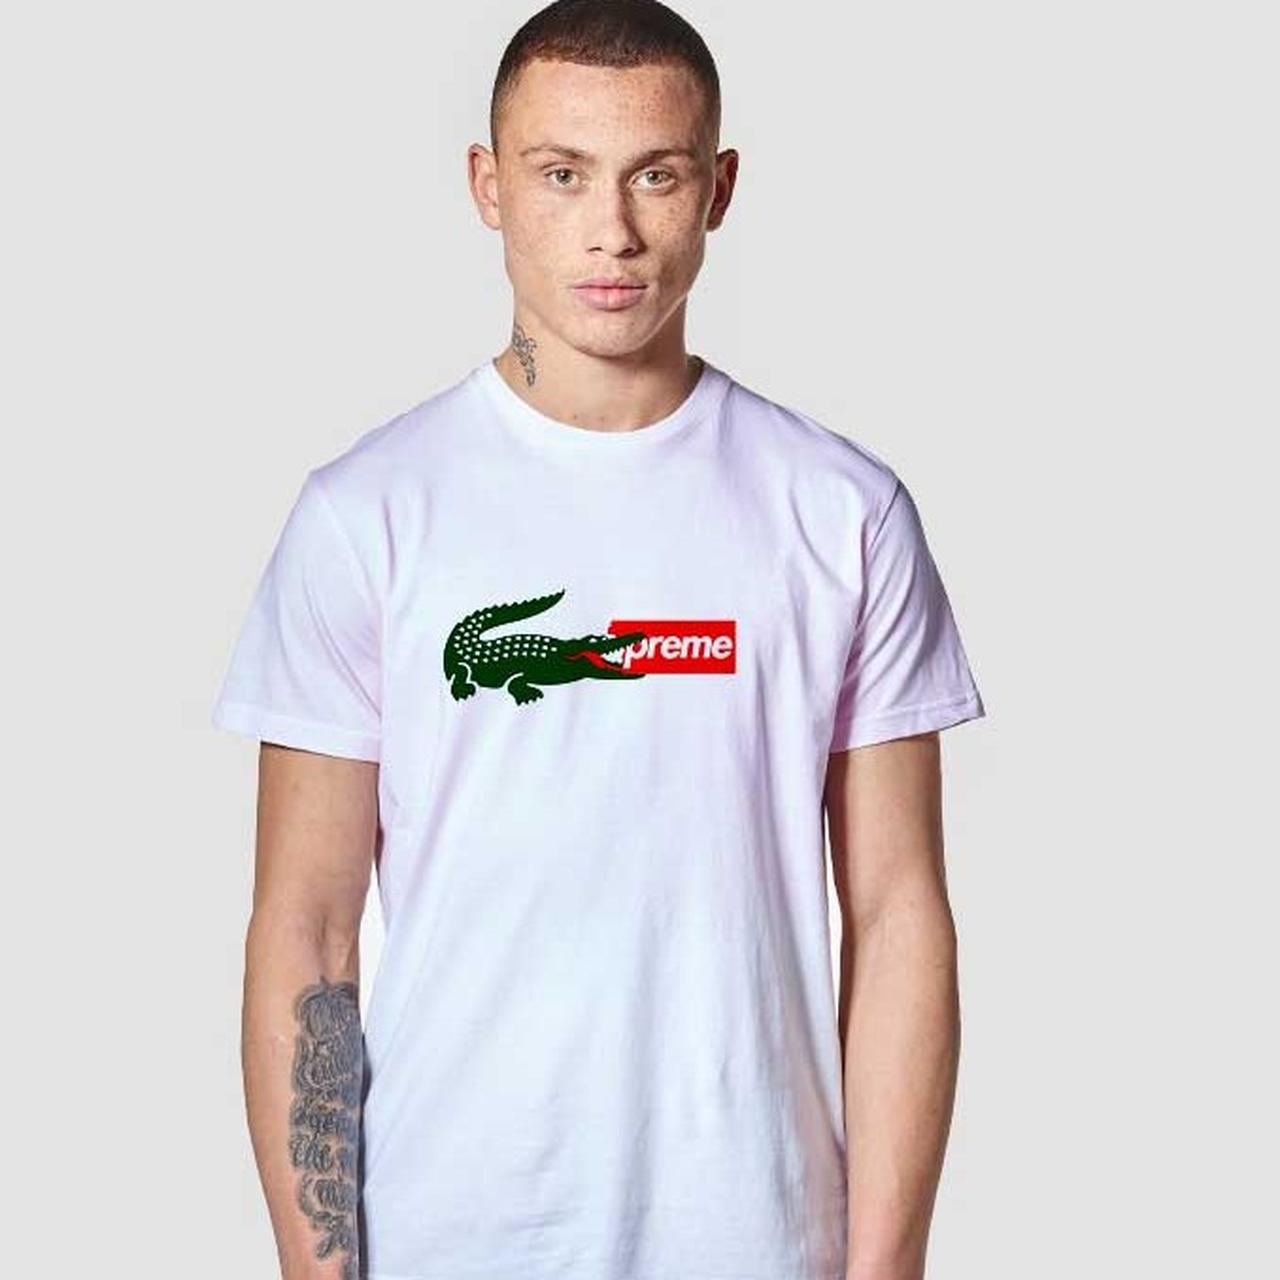 The Supreme x Lacoste Collaboration T Shirt Material... - Depop